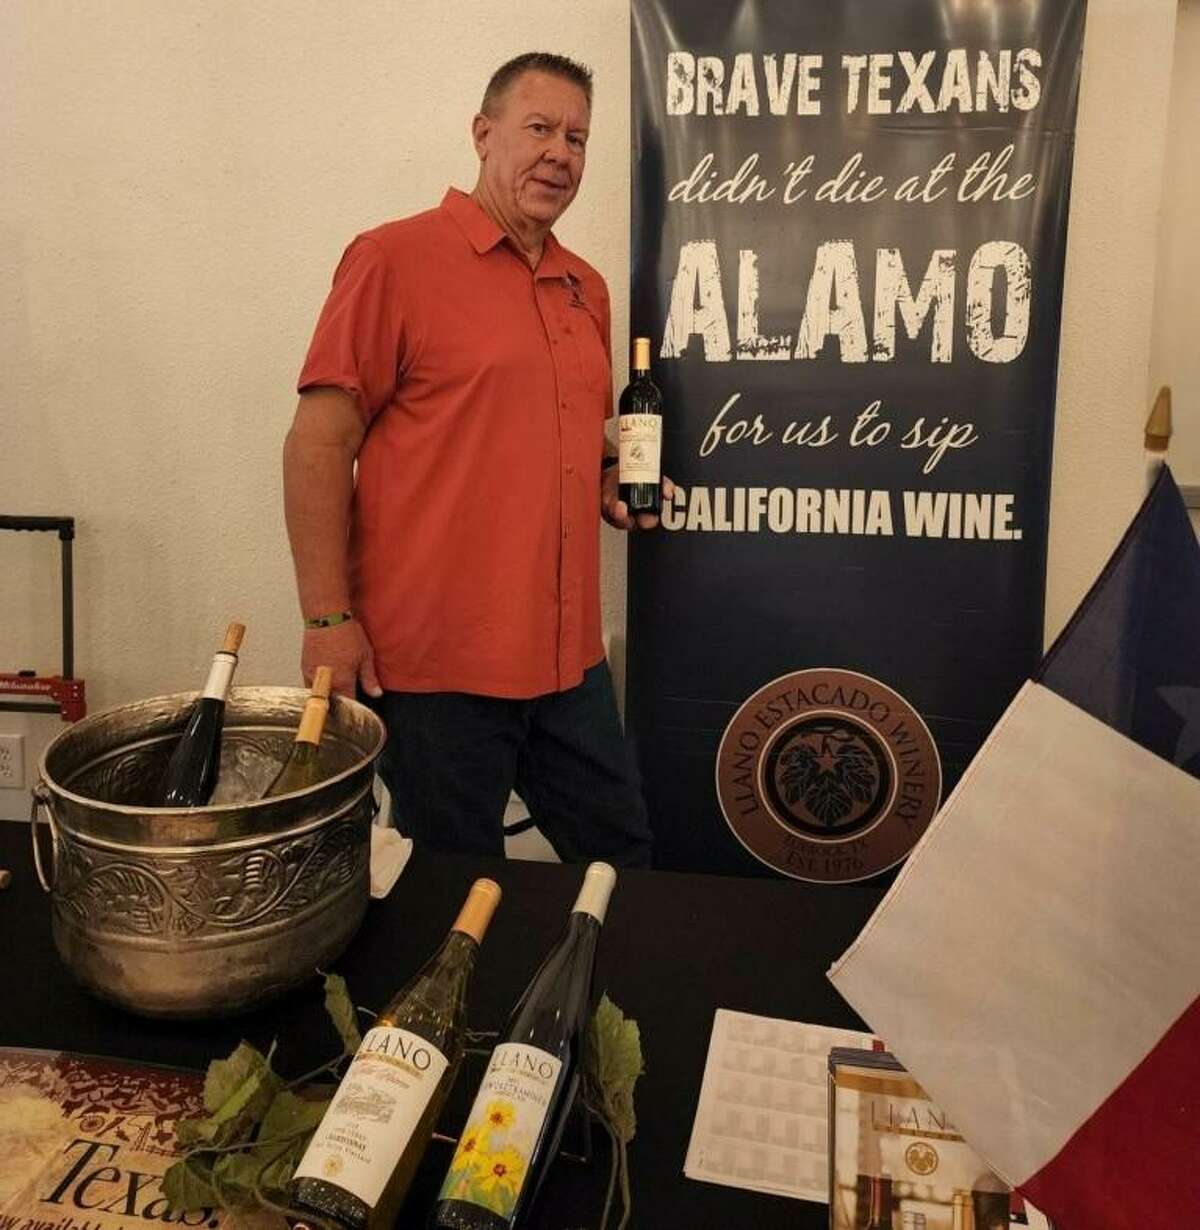 Bill Freidhof is pictured with Llano Estacado wine during a charity wine event for Bridgewood Farms on Saturday.